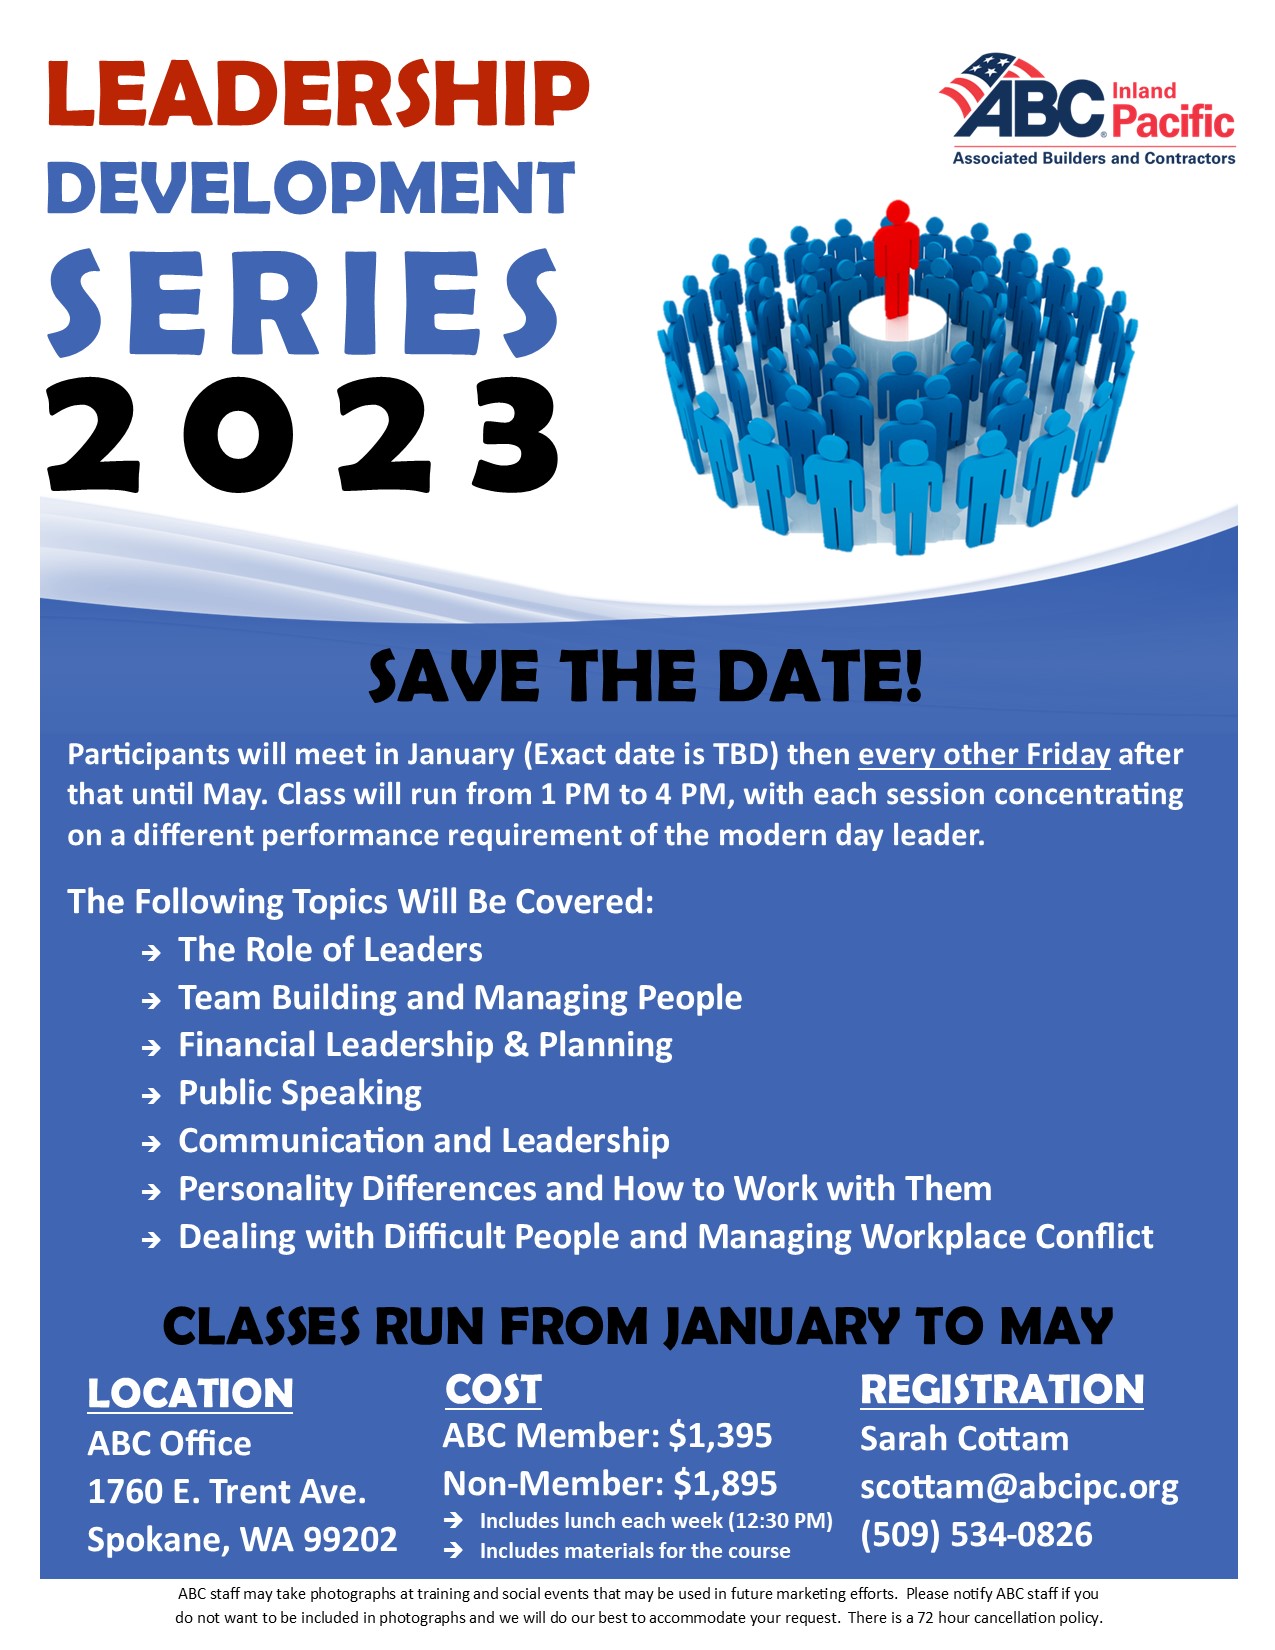 Save the Date Leadership 2023